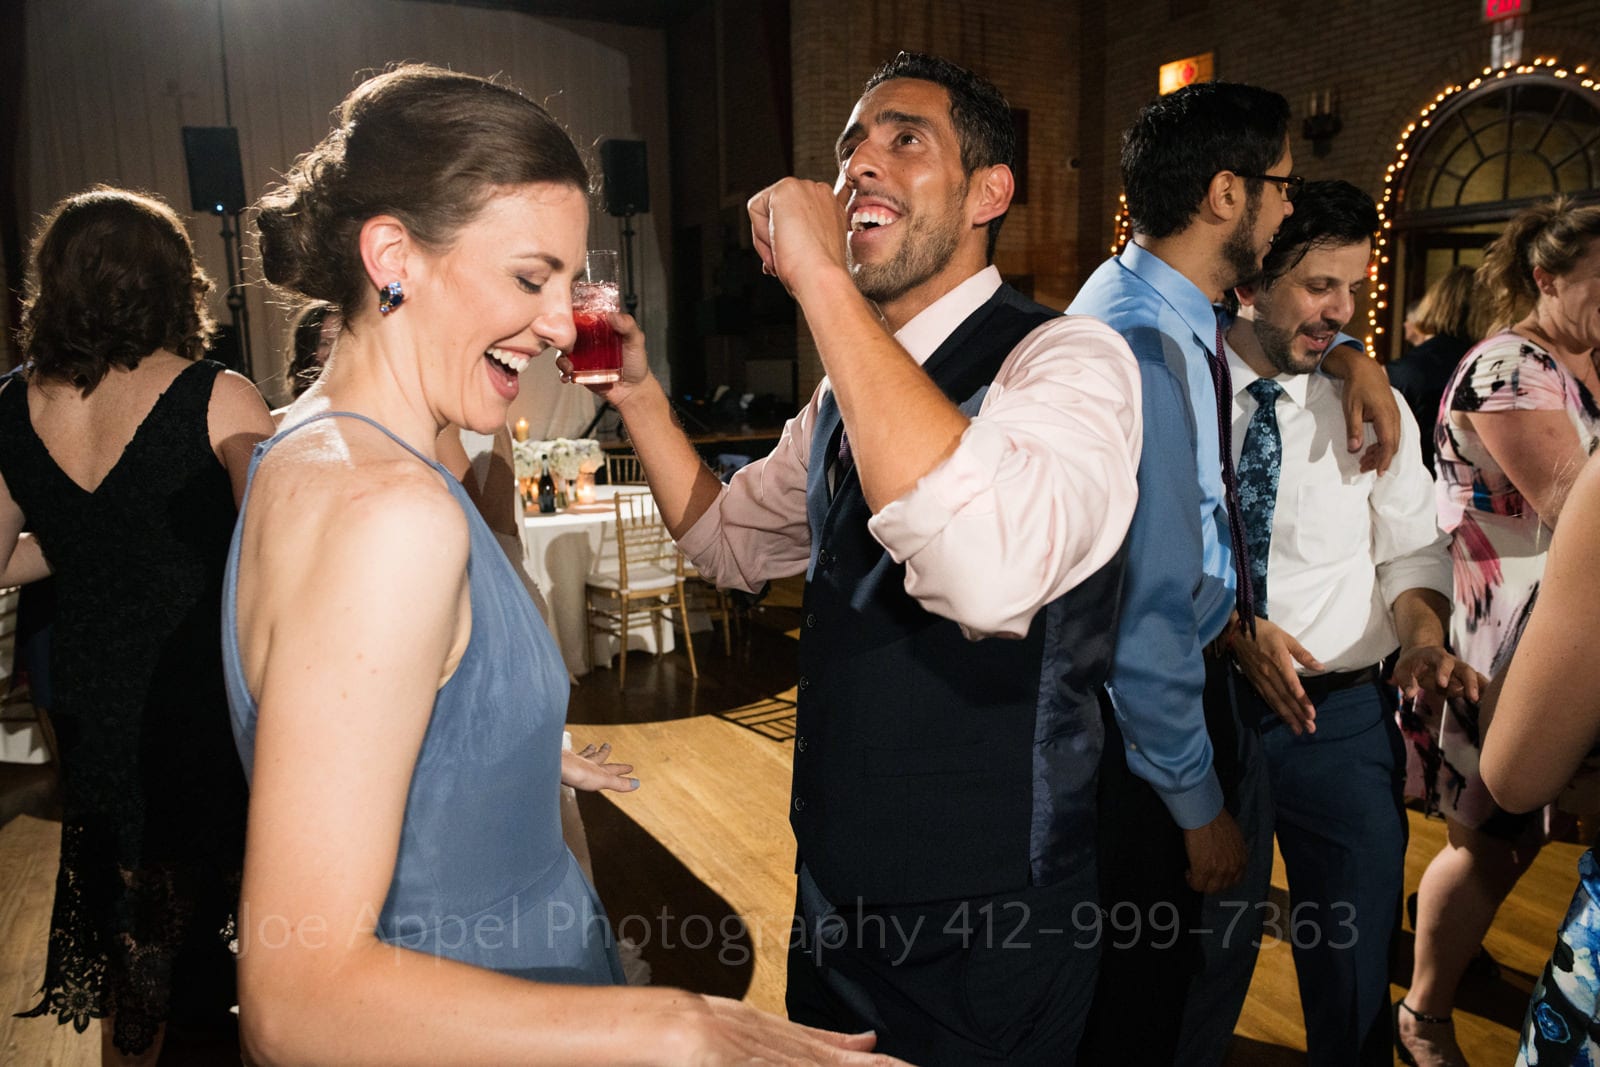 A woman in a blue dress dances with a man wearing shirt sleeves and a vest holding a red drink during a St Francis Hall Washington DC wedding.